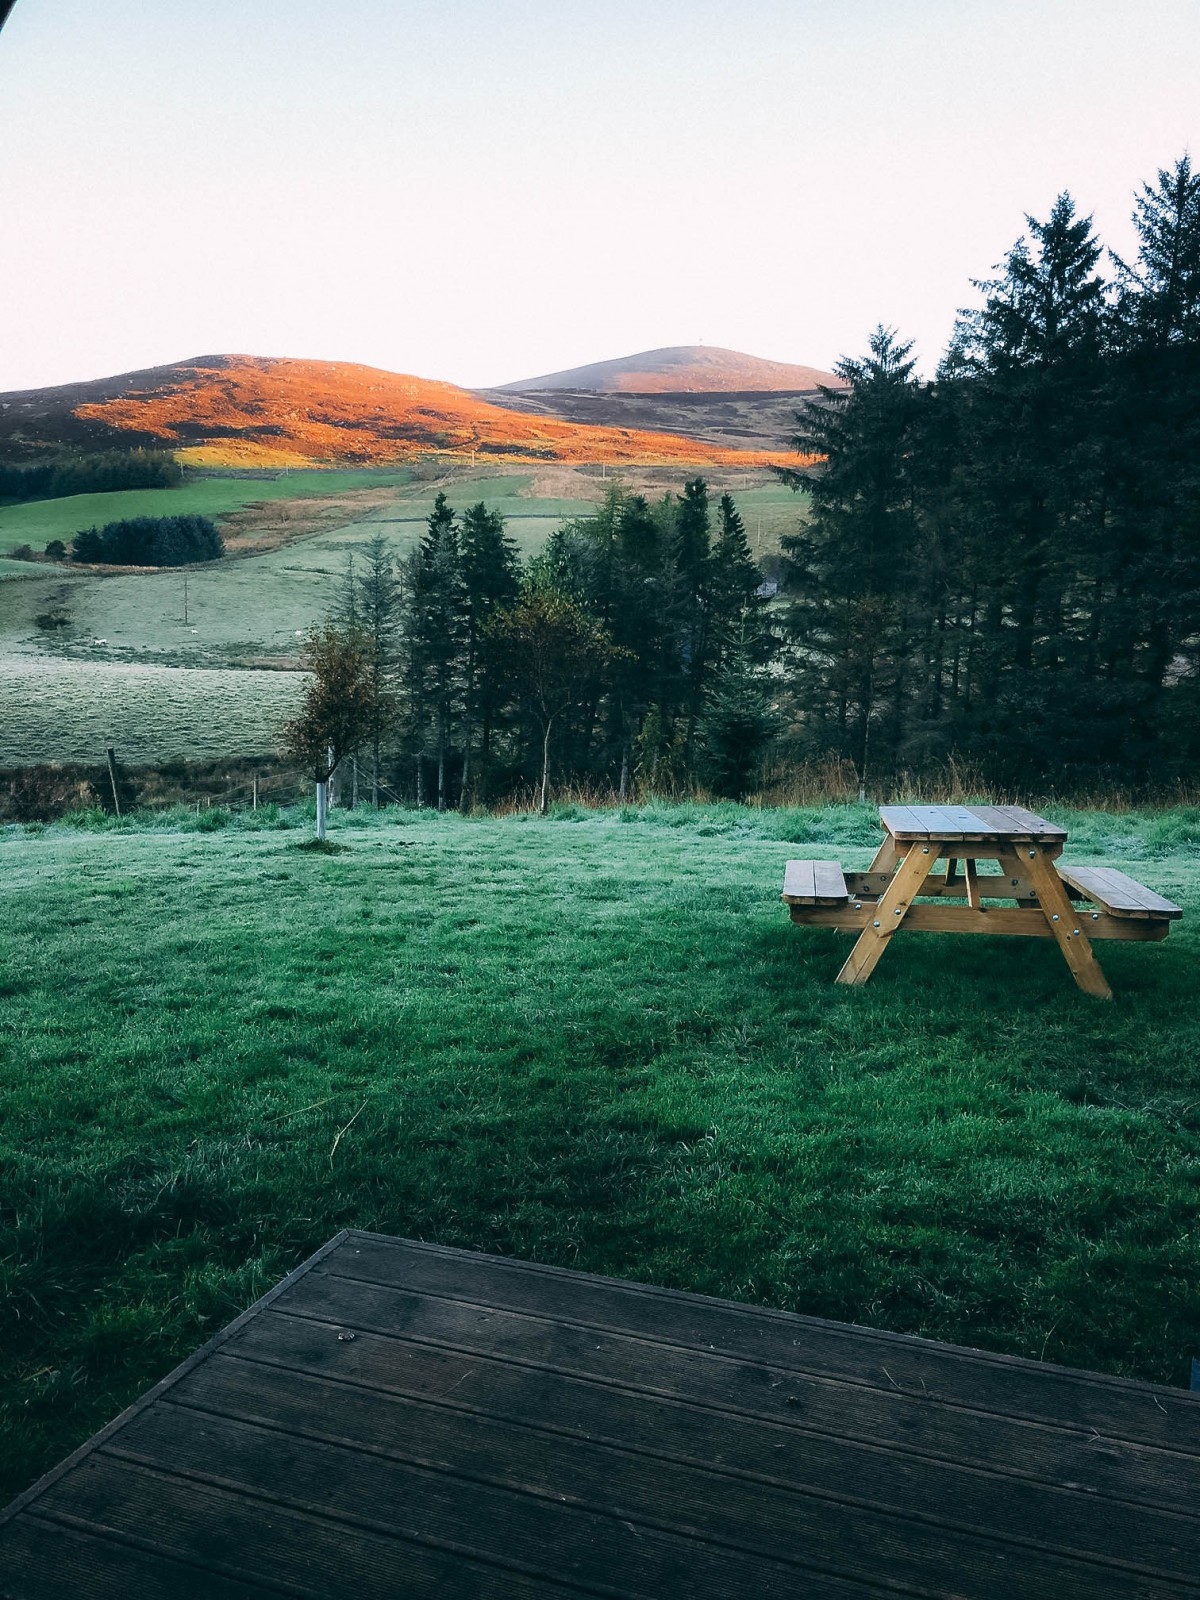 Kristy Ashton went glamping with Jamie Howden to Eco Camp Glenshee in Perthshire